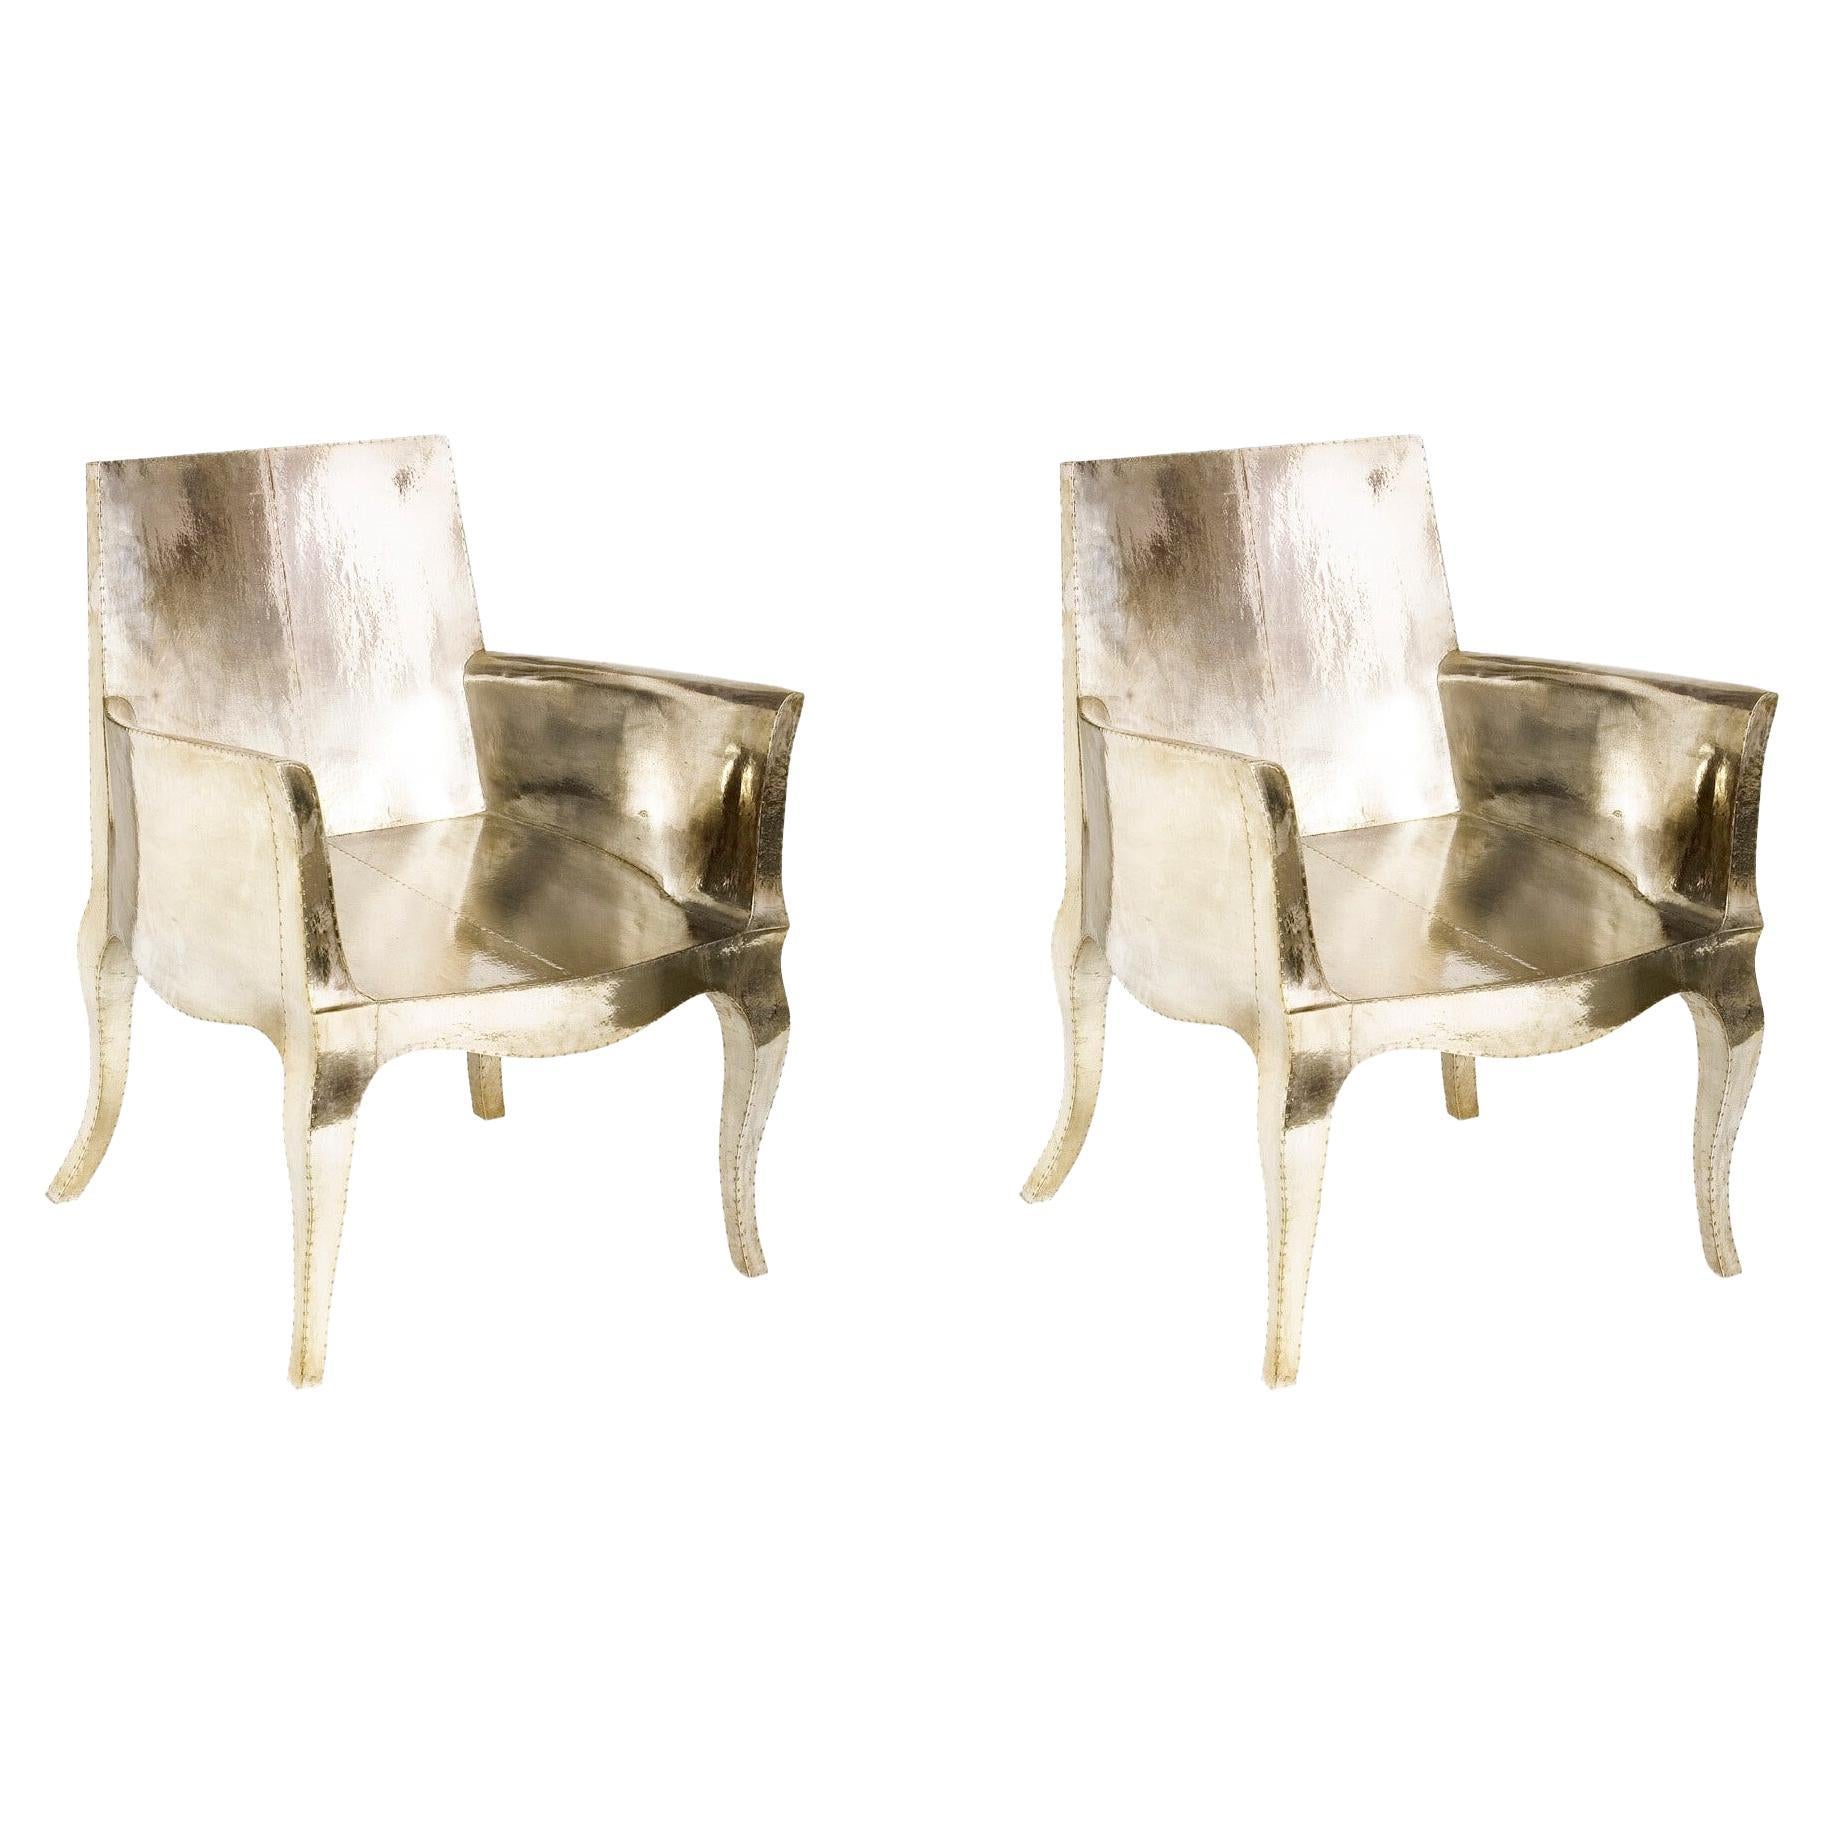 Art Deco Style Chairs Pair Designed by Paul Mathieu for Stephanie Odegard For Sale